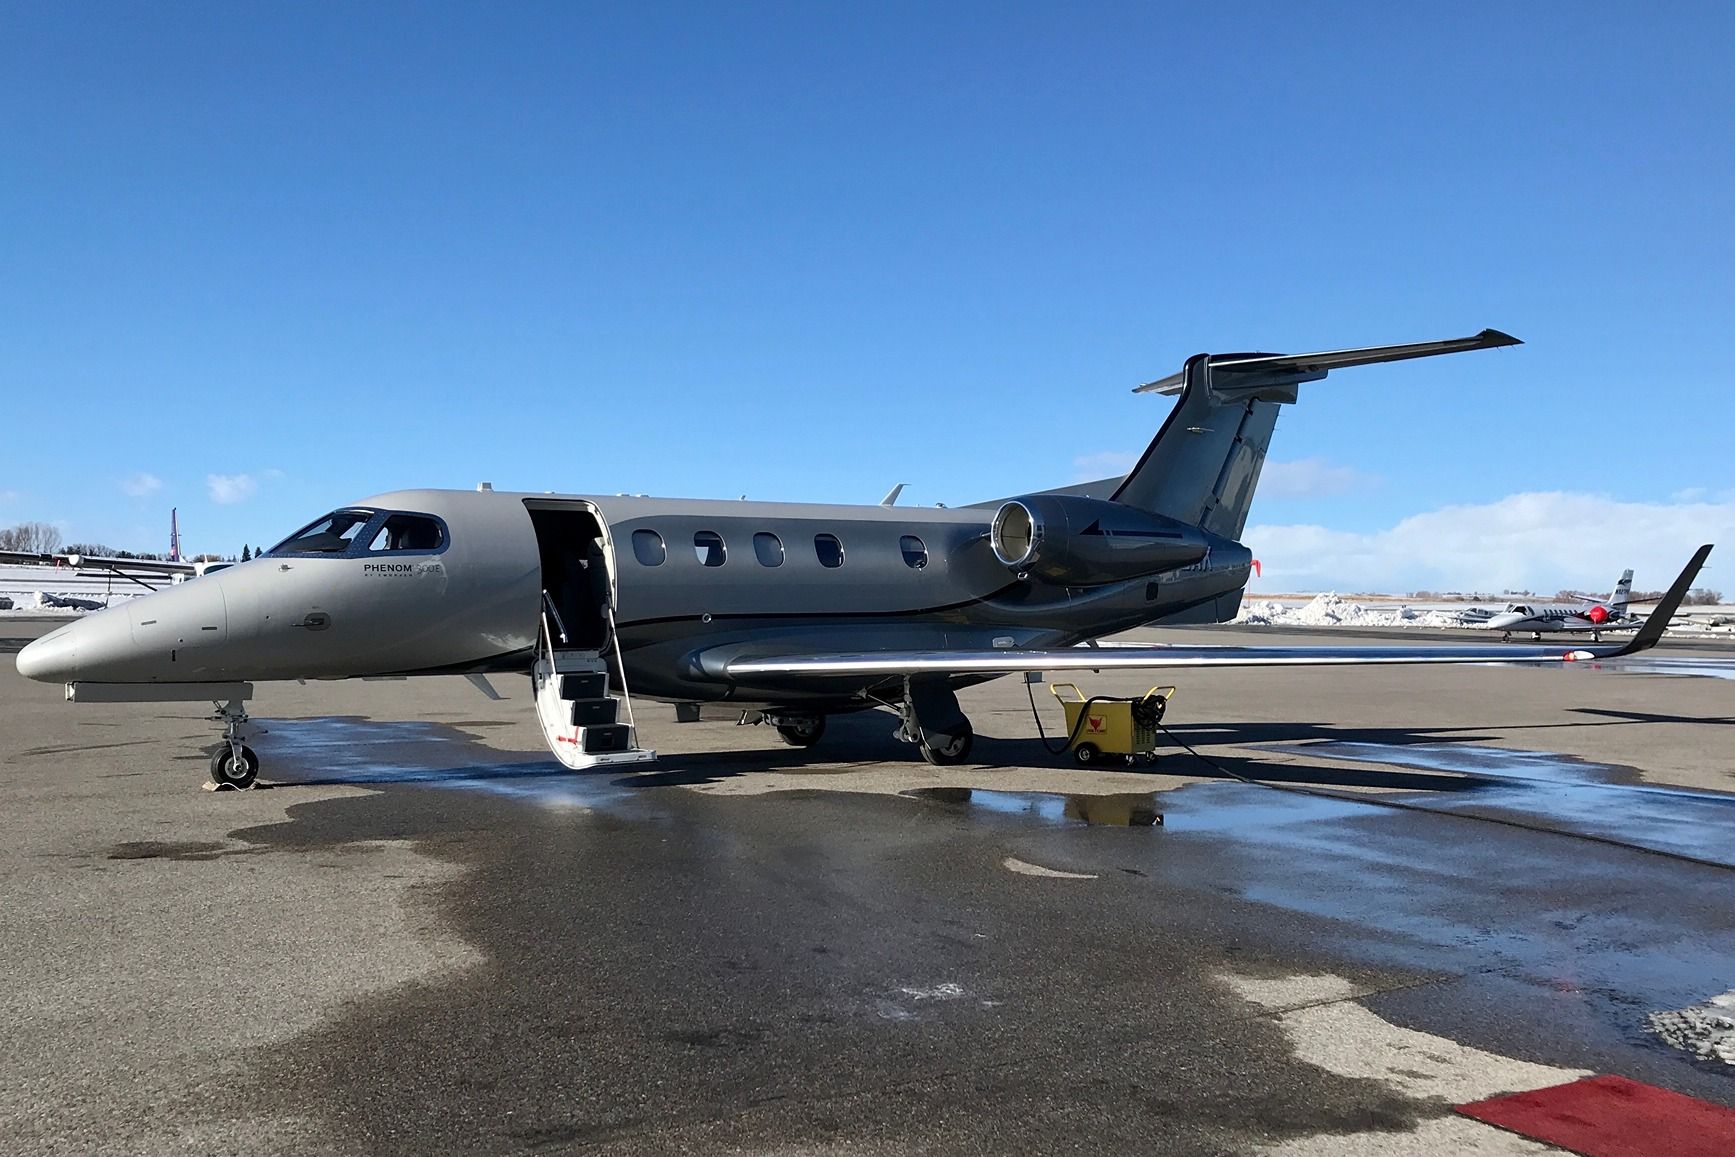 An Embraer Phenom 300E parked on the airport apron.